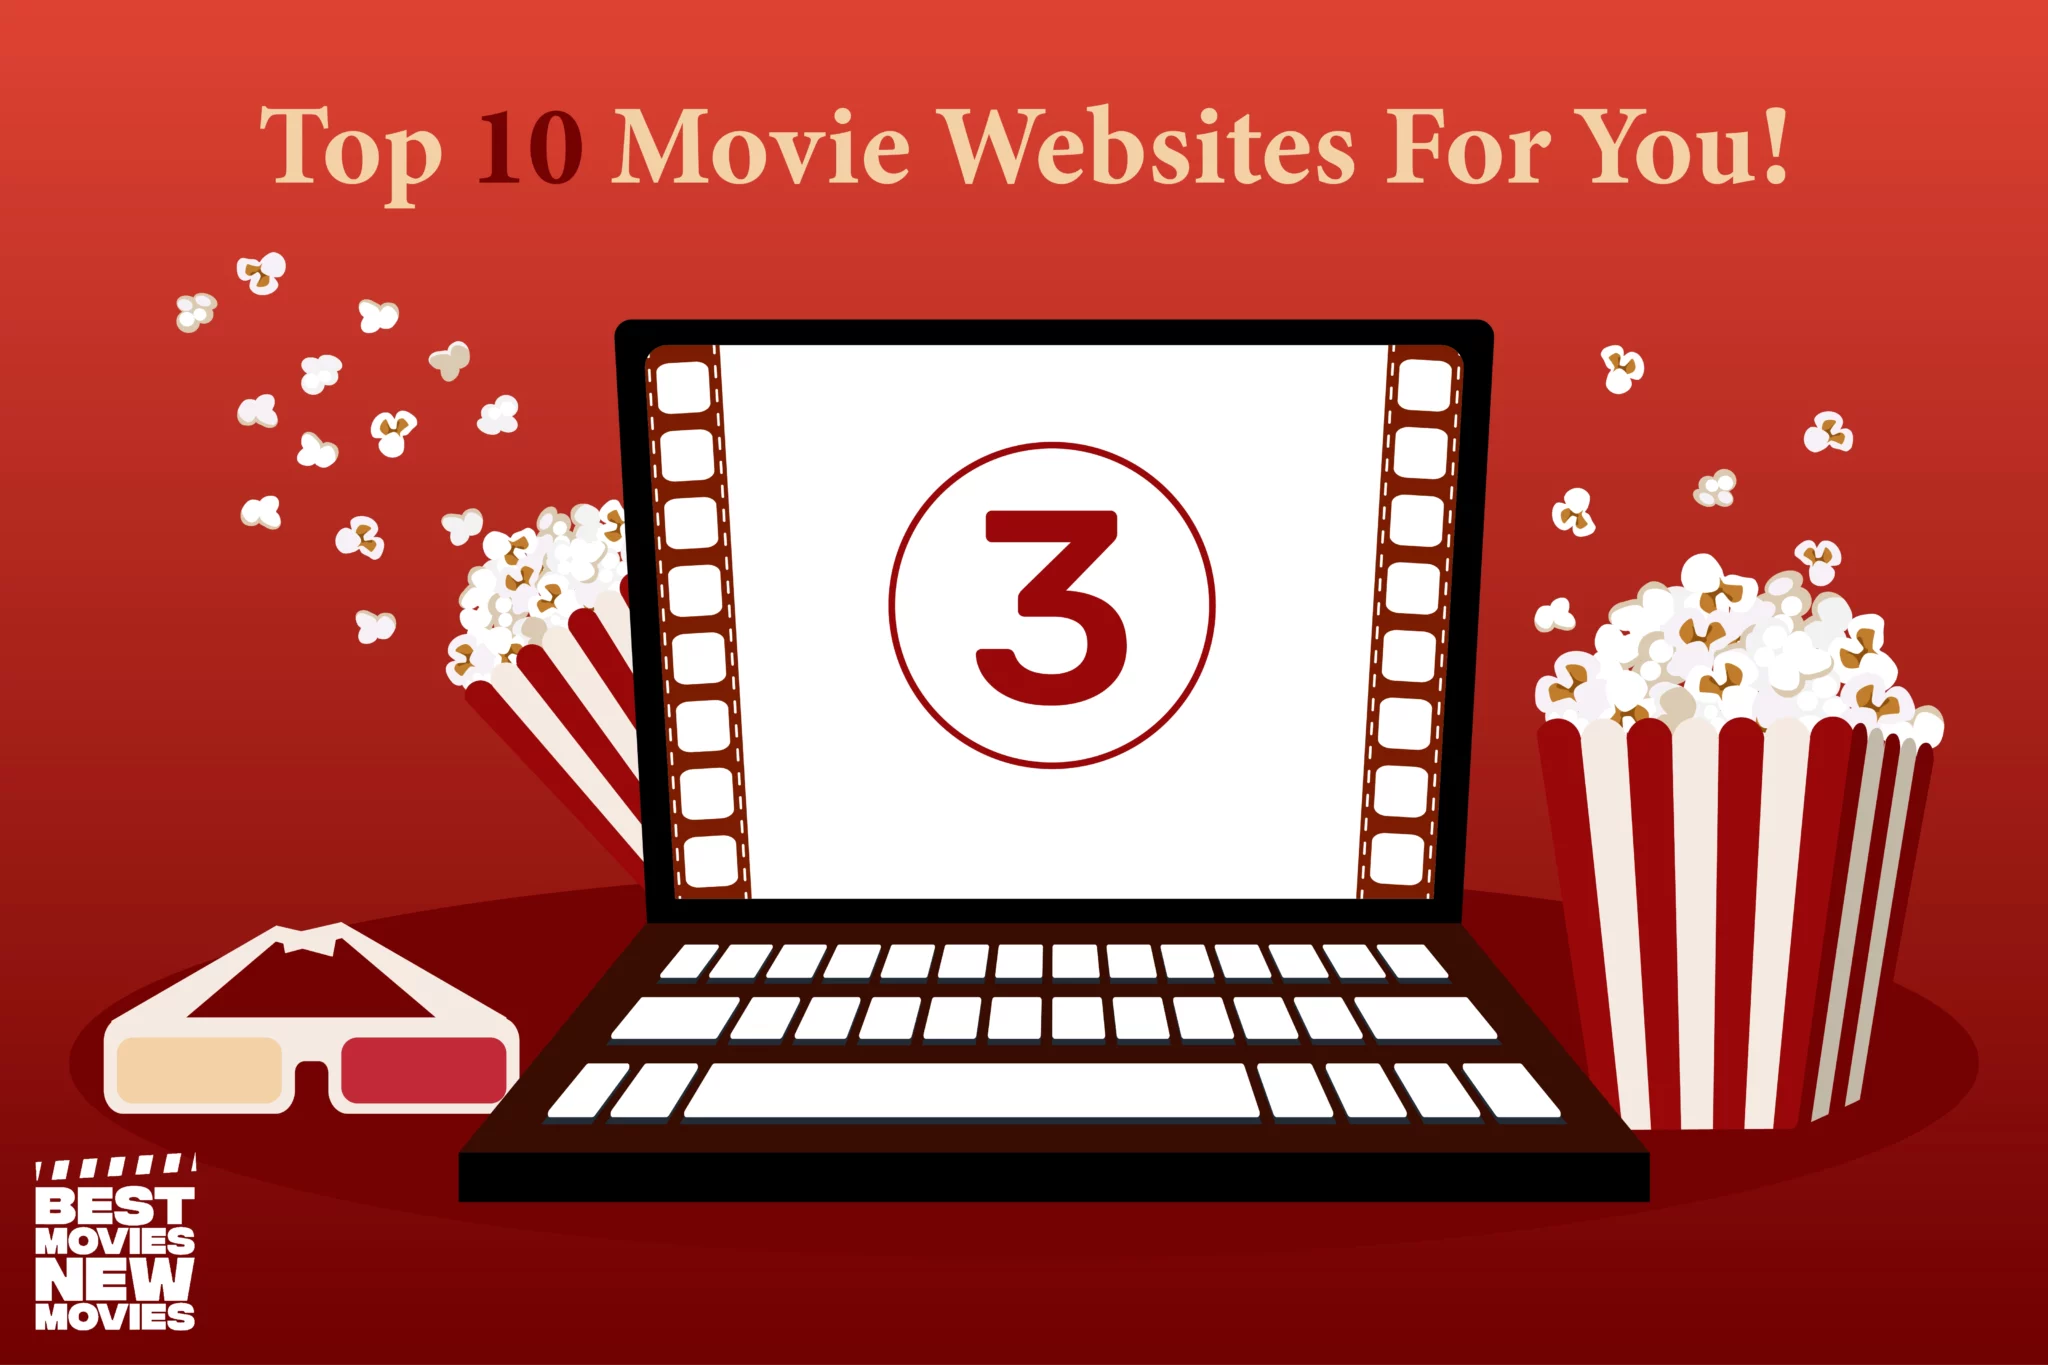 Top 10 Movie Websites For You!